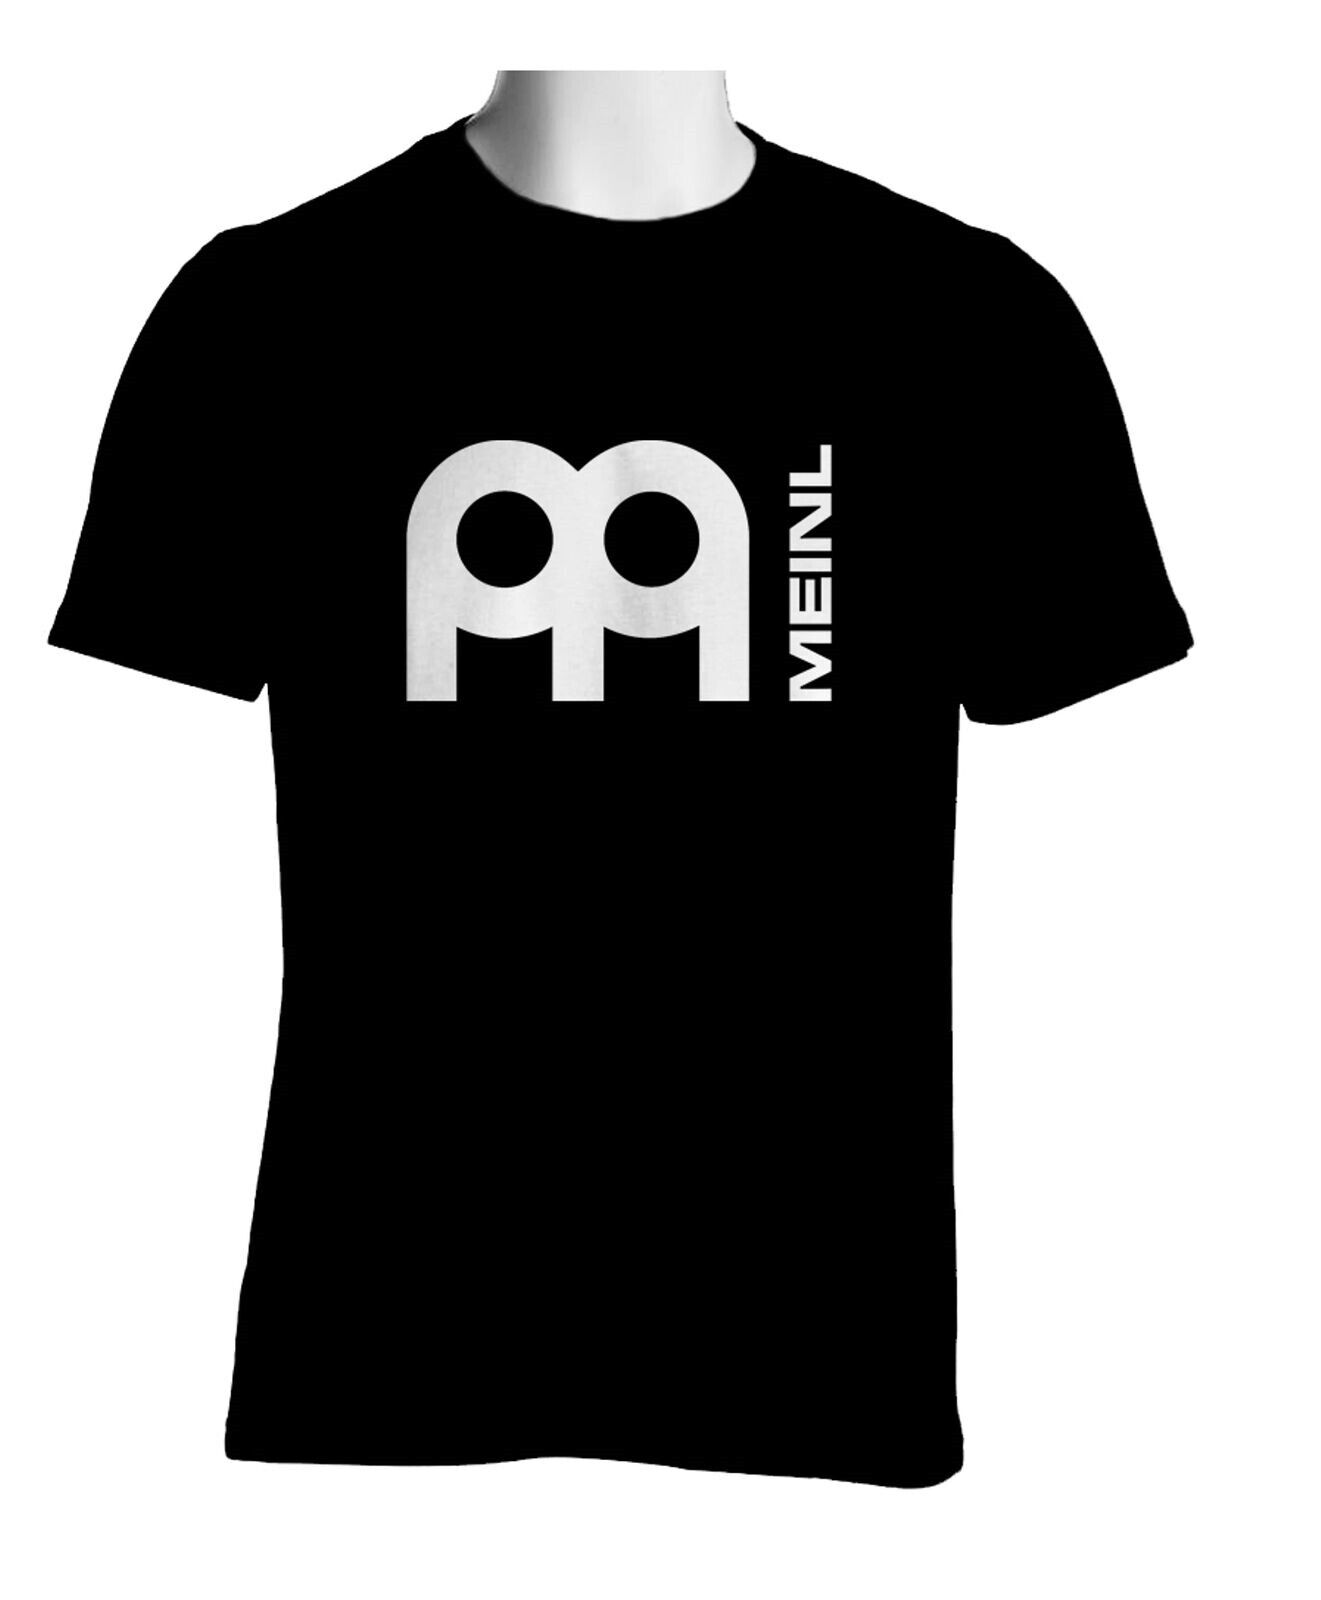 exhaust insufficient charity Meinl percussion cymbals t-shirt | eBay